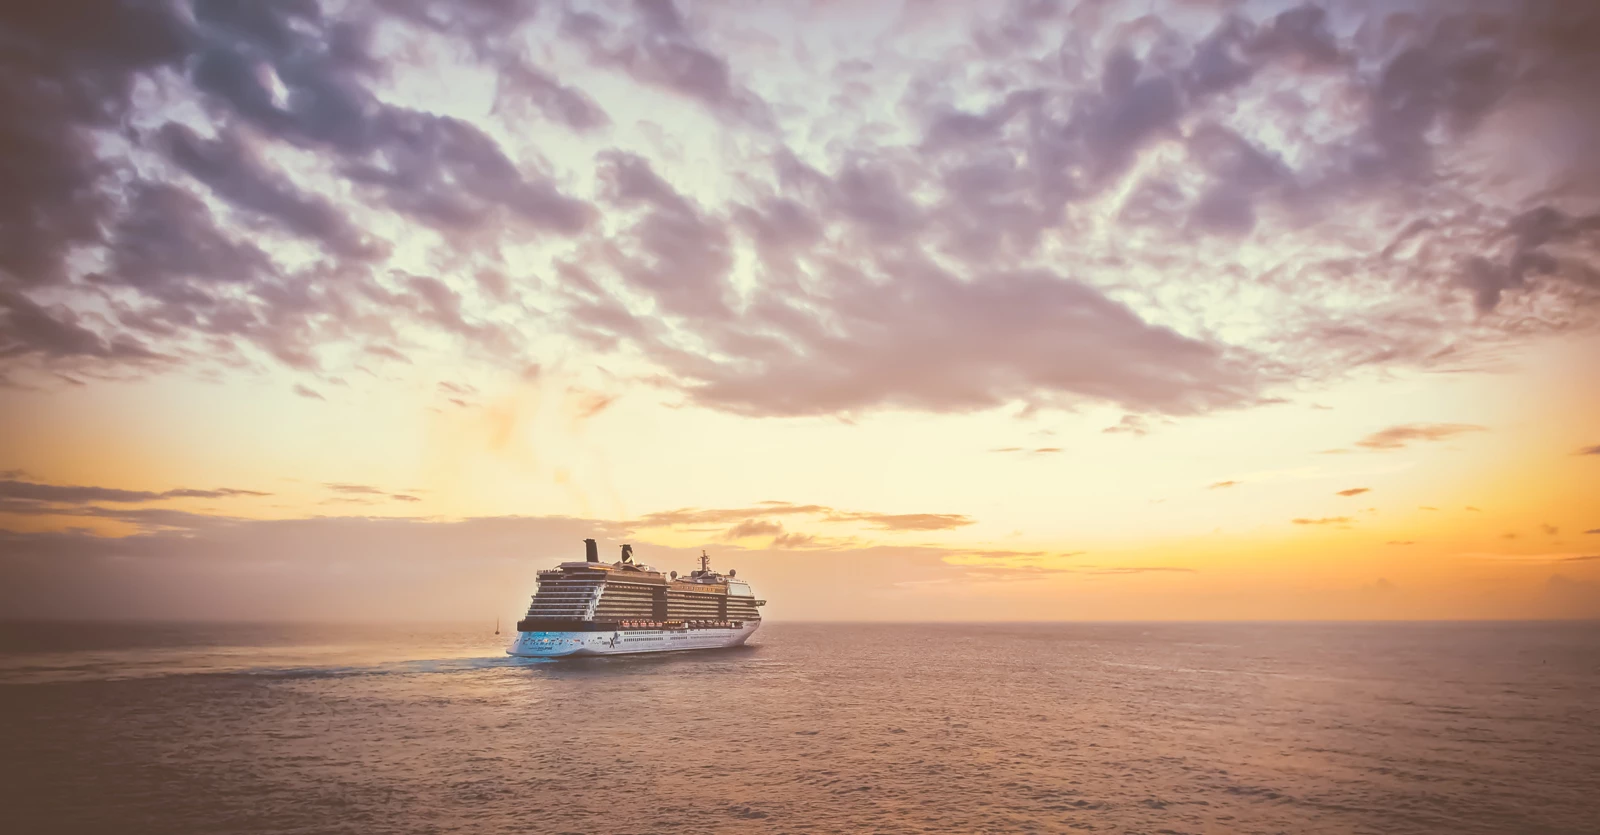 A cruise ship on a large ocean heading off into the sunset